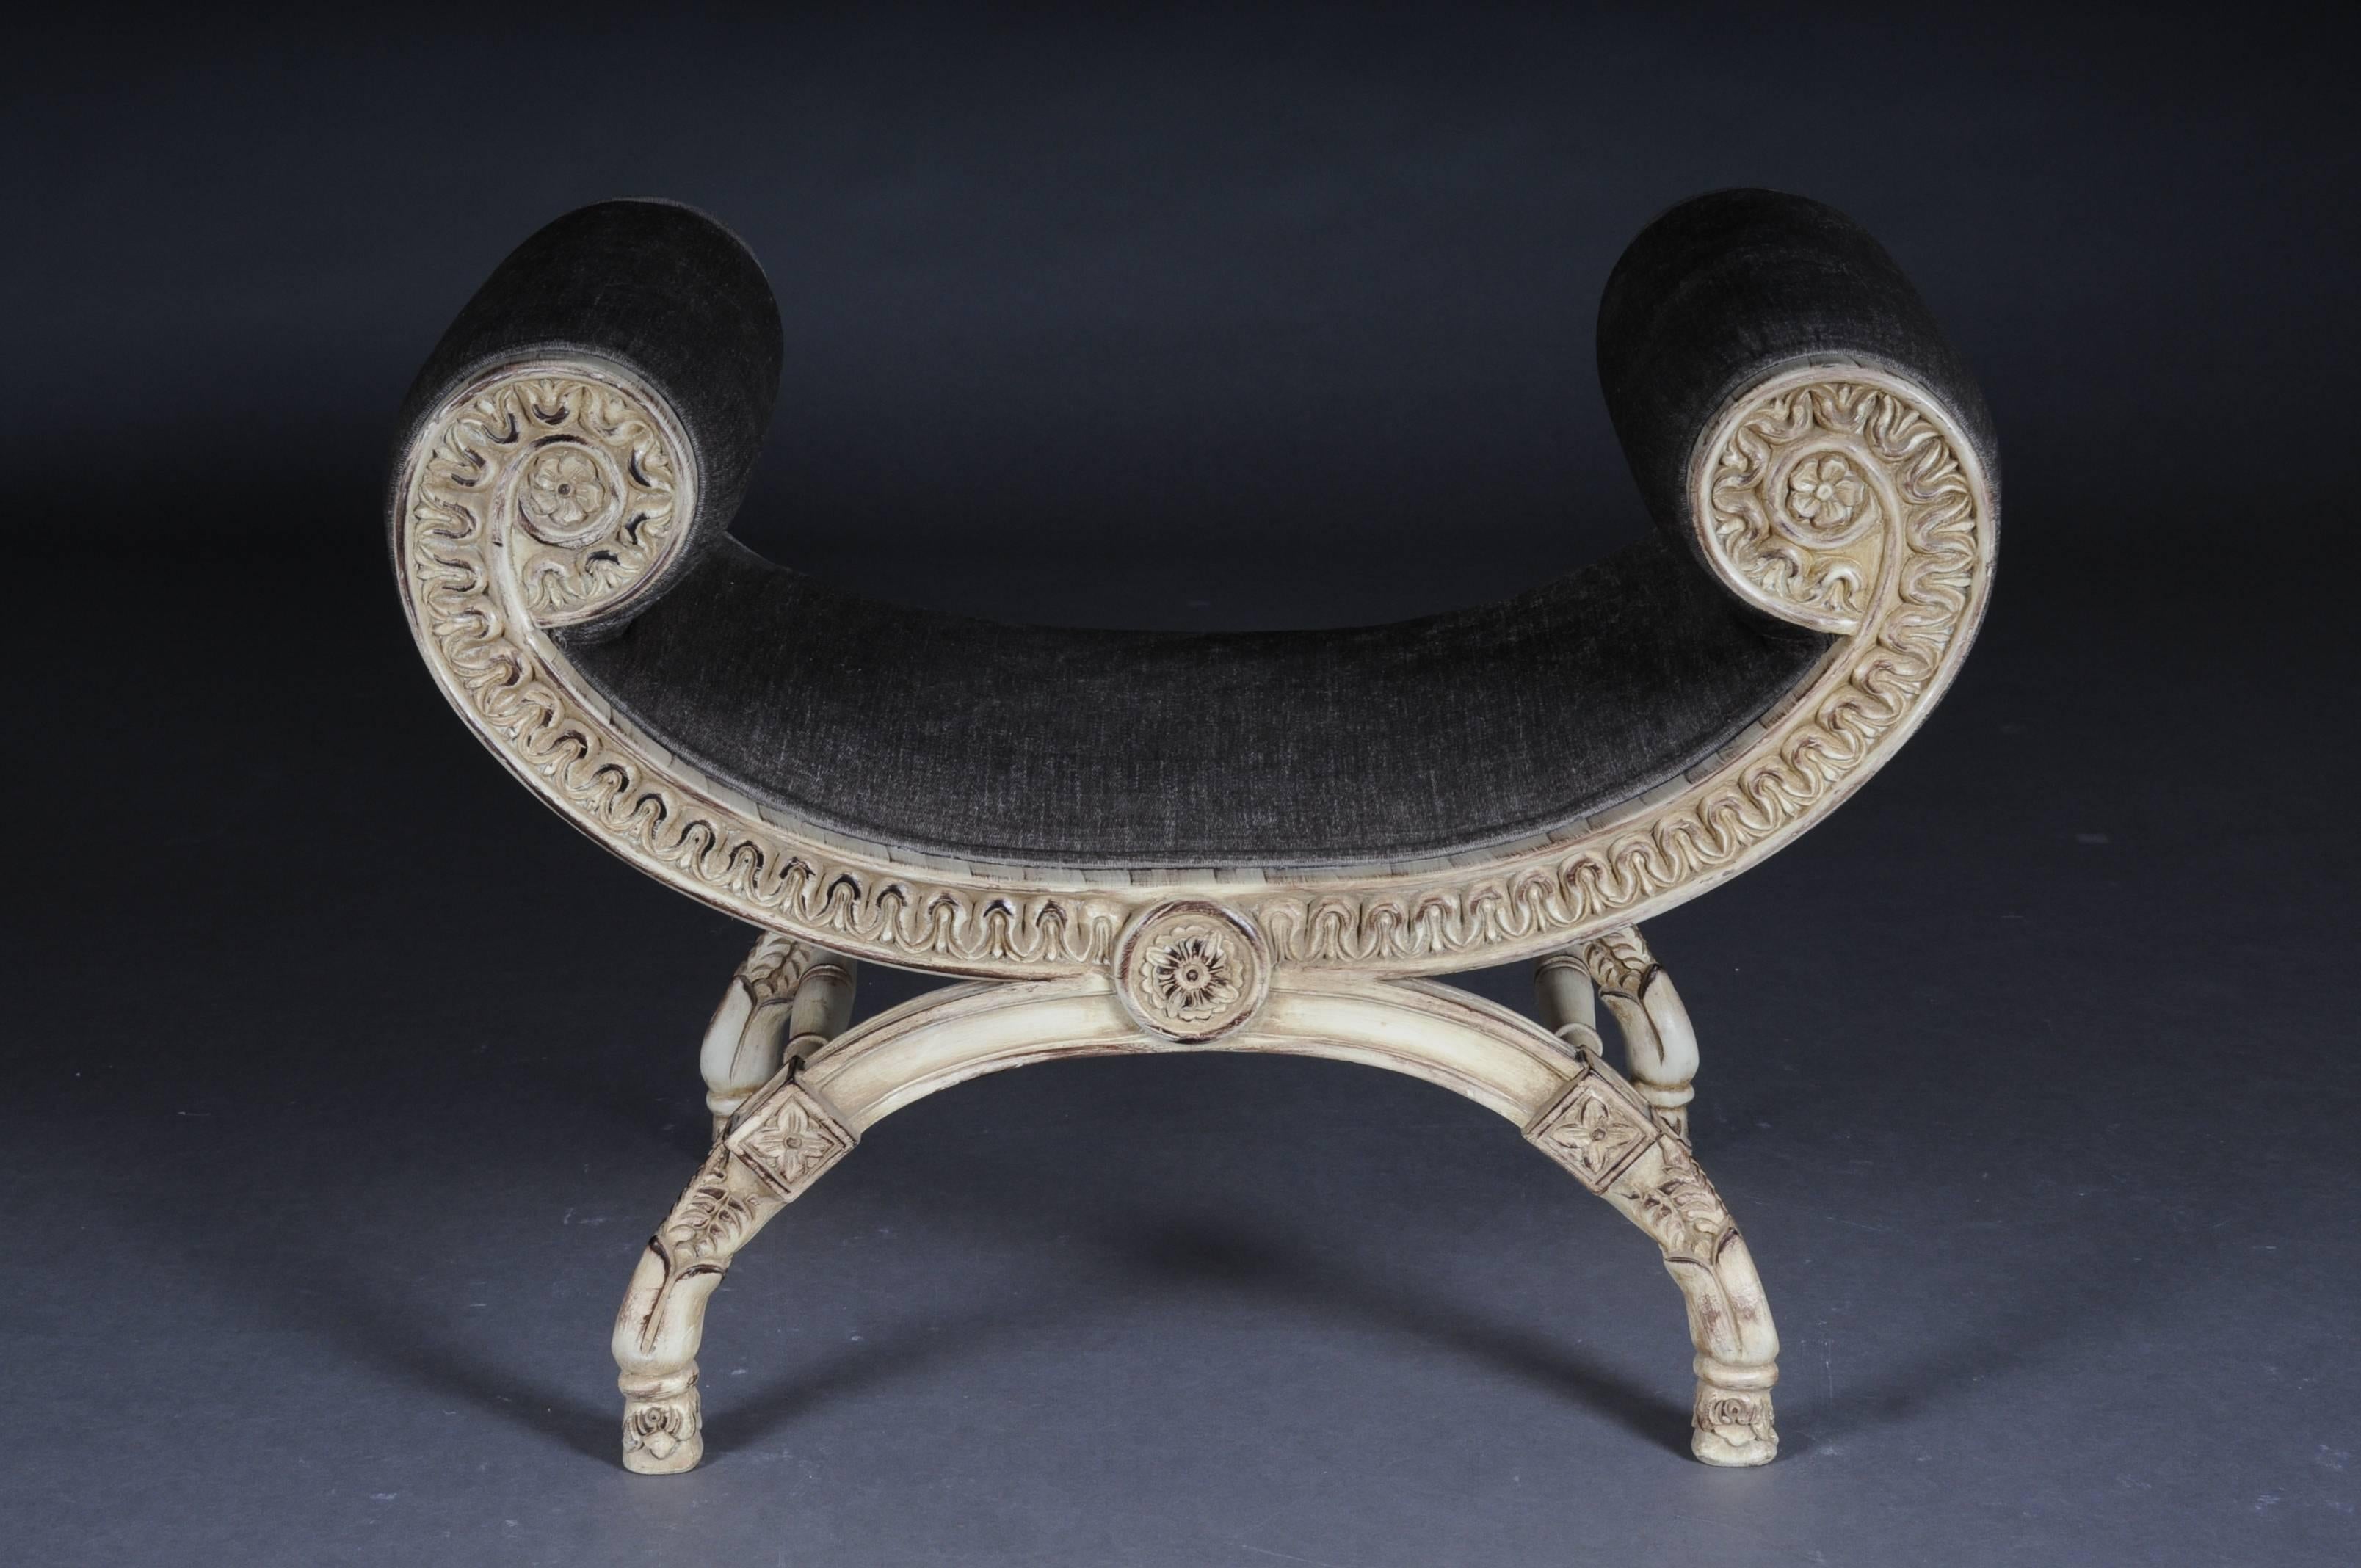 Exceptional French Bench, Stool, Gondola in Empire No. 2 In Good Condition For Sale In Berlin, DE